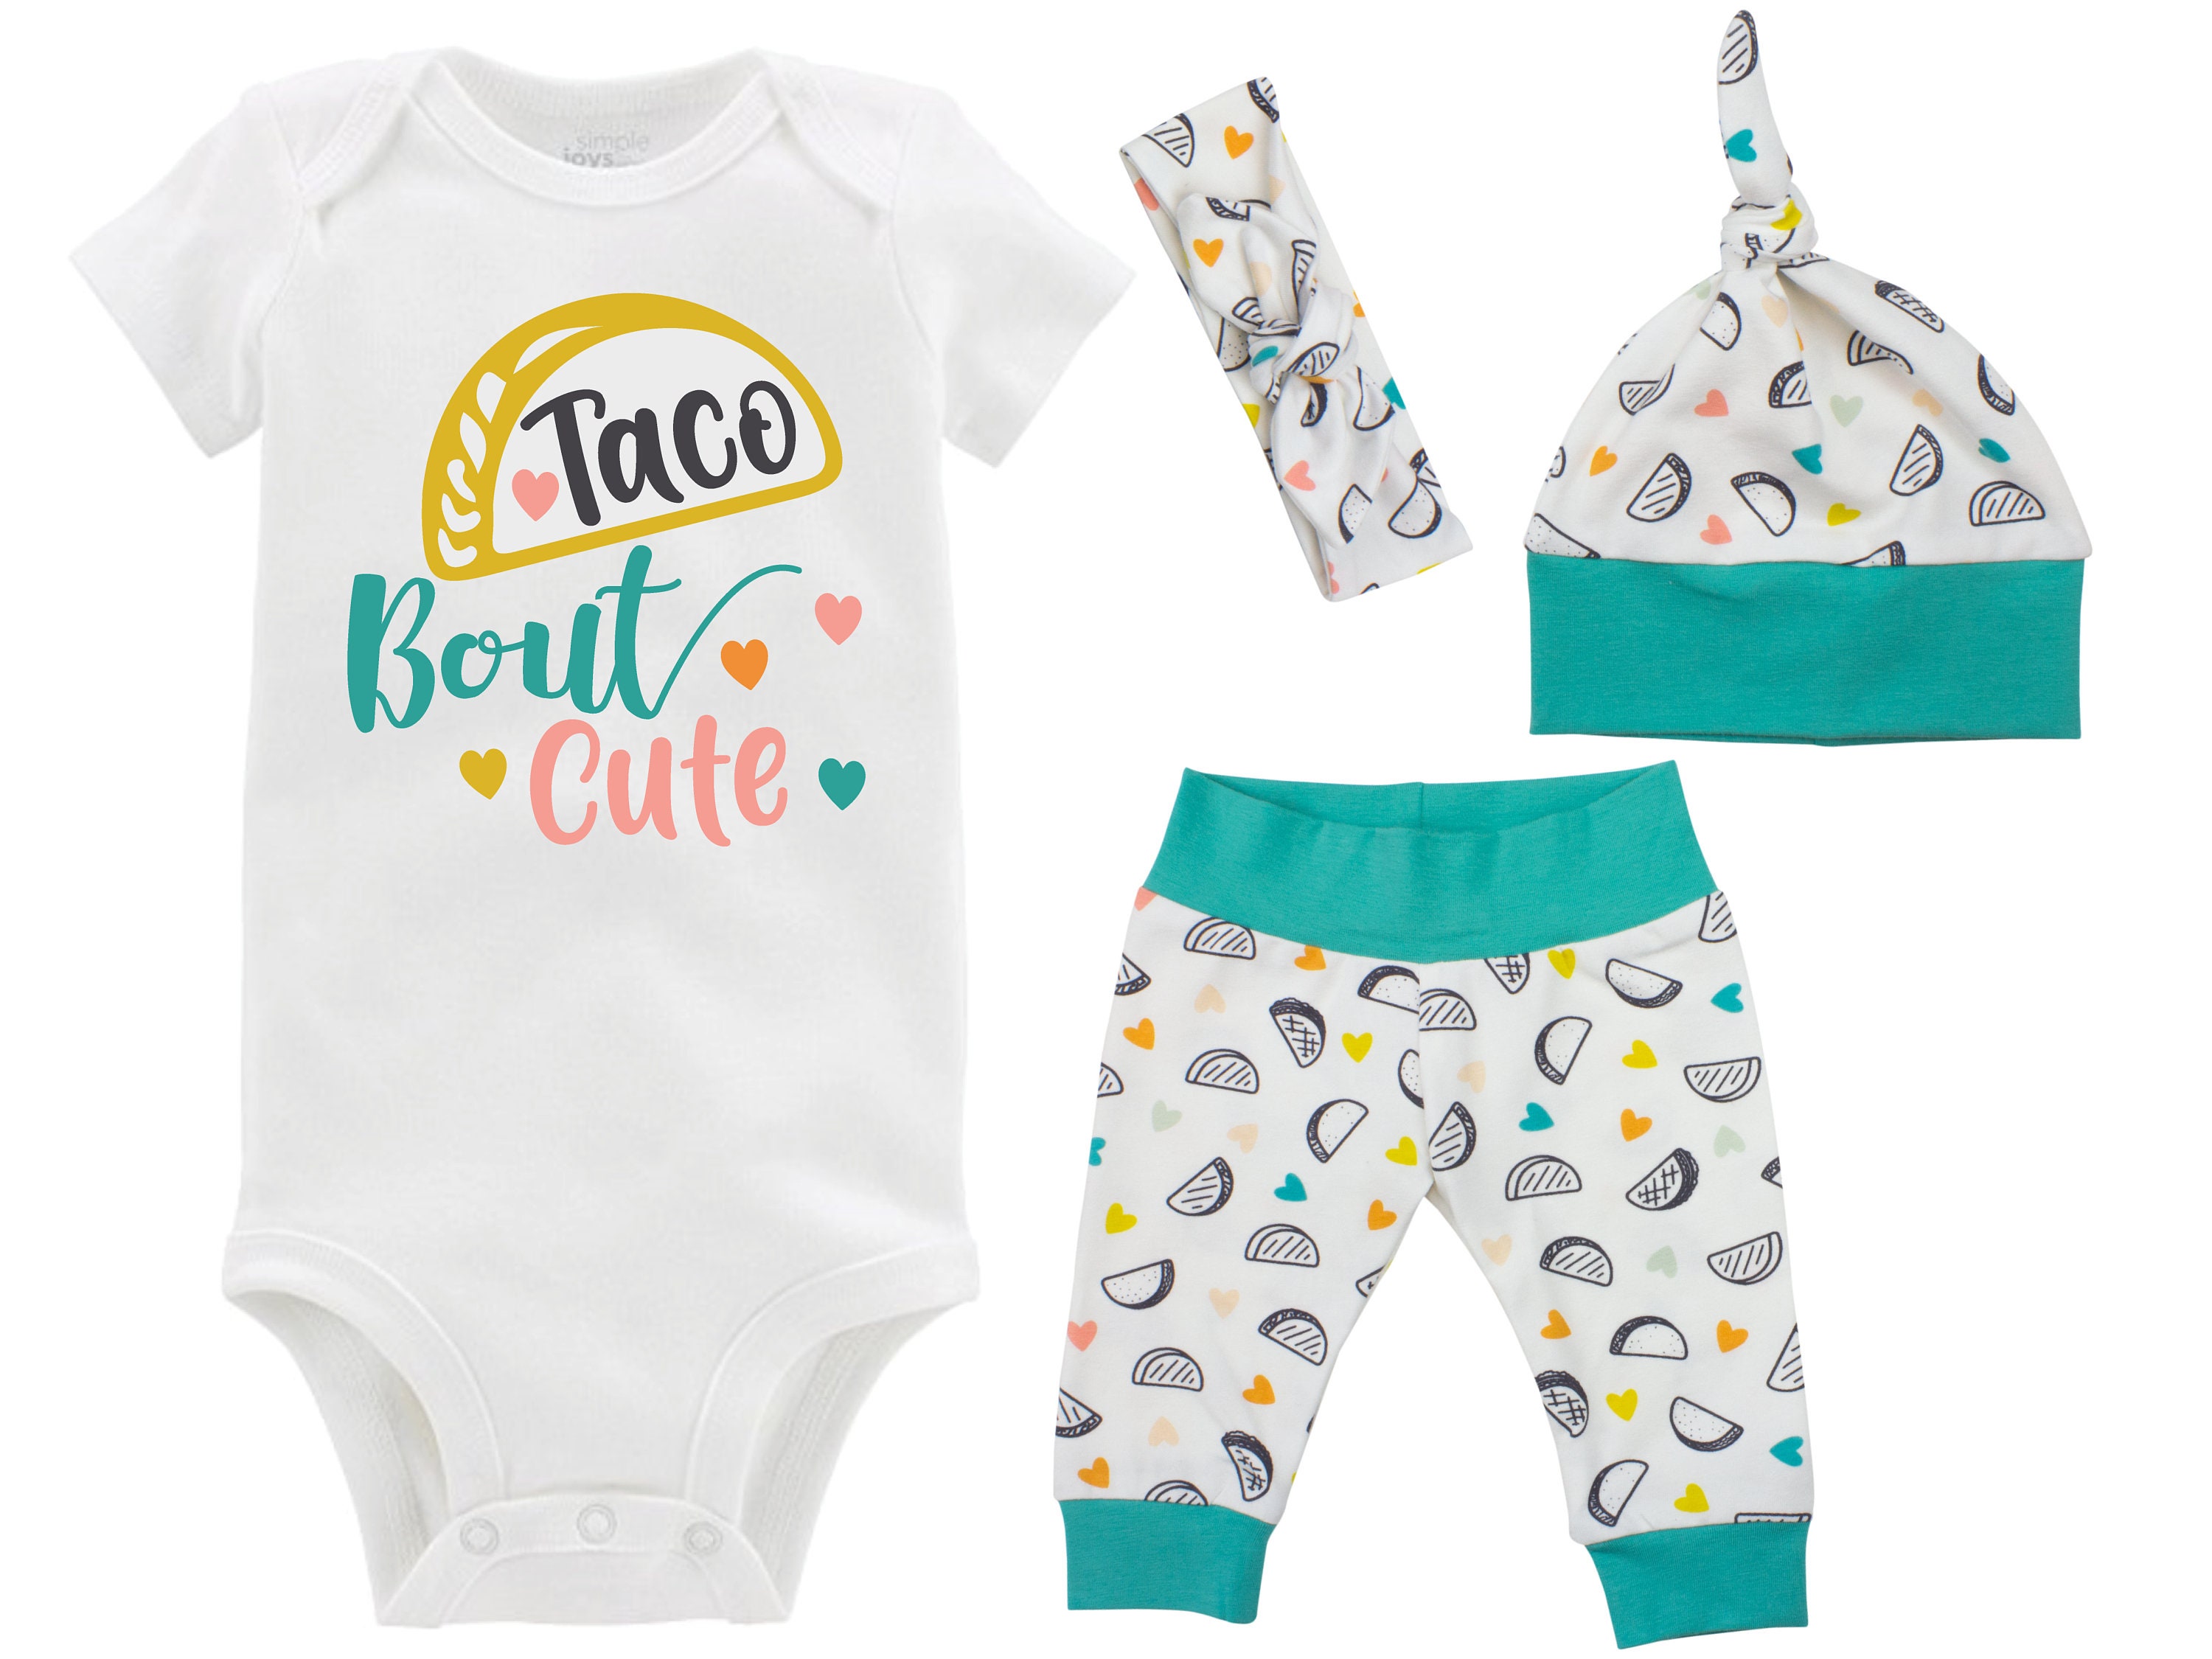 coming home outfit Taco Bout' CUTE pants and ONESIE \u00ae or t shirt outfit shower gift toddler outfits infant outfit newborn outfit